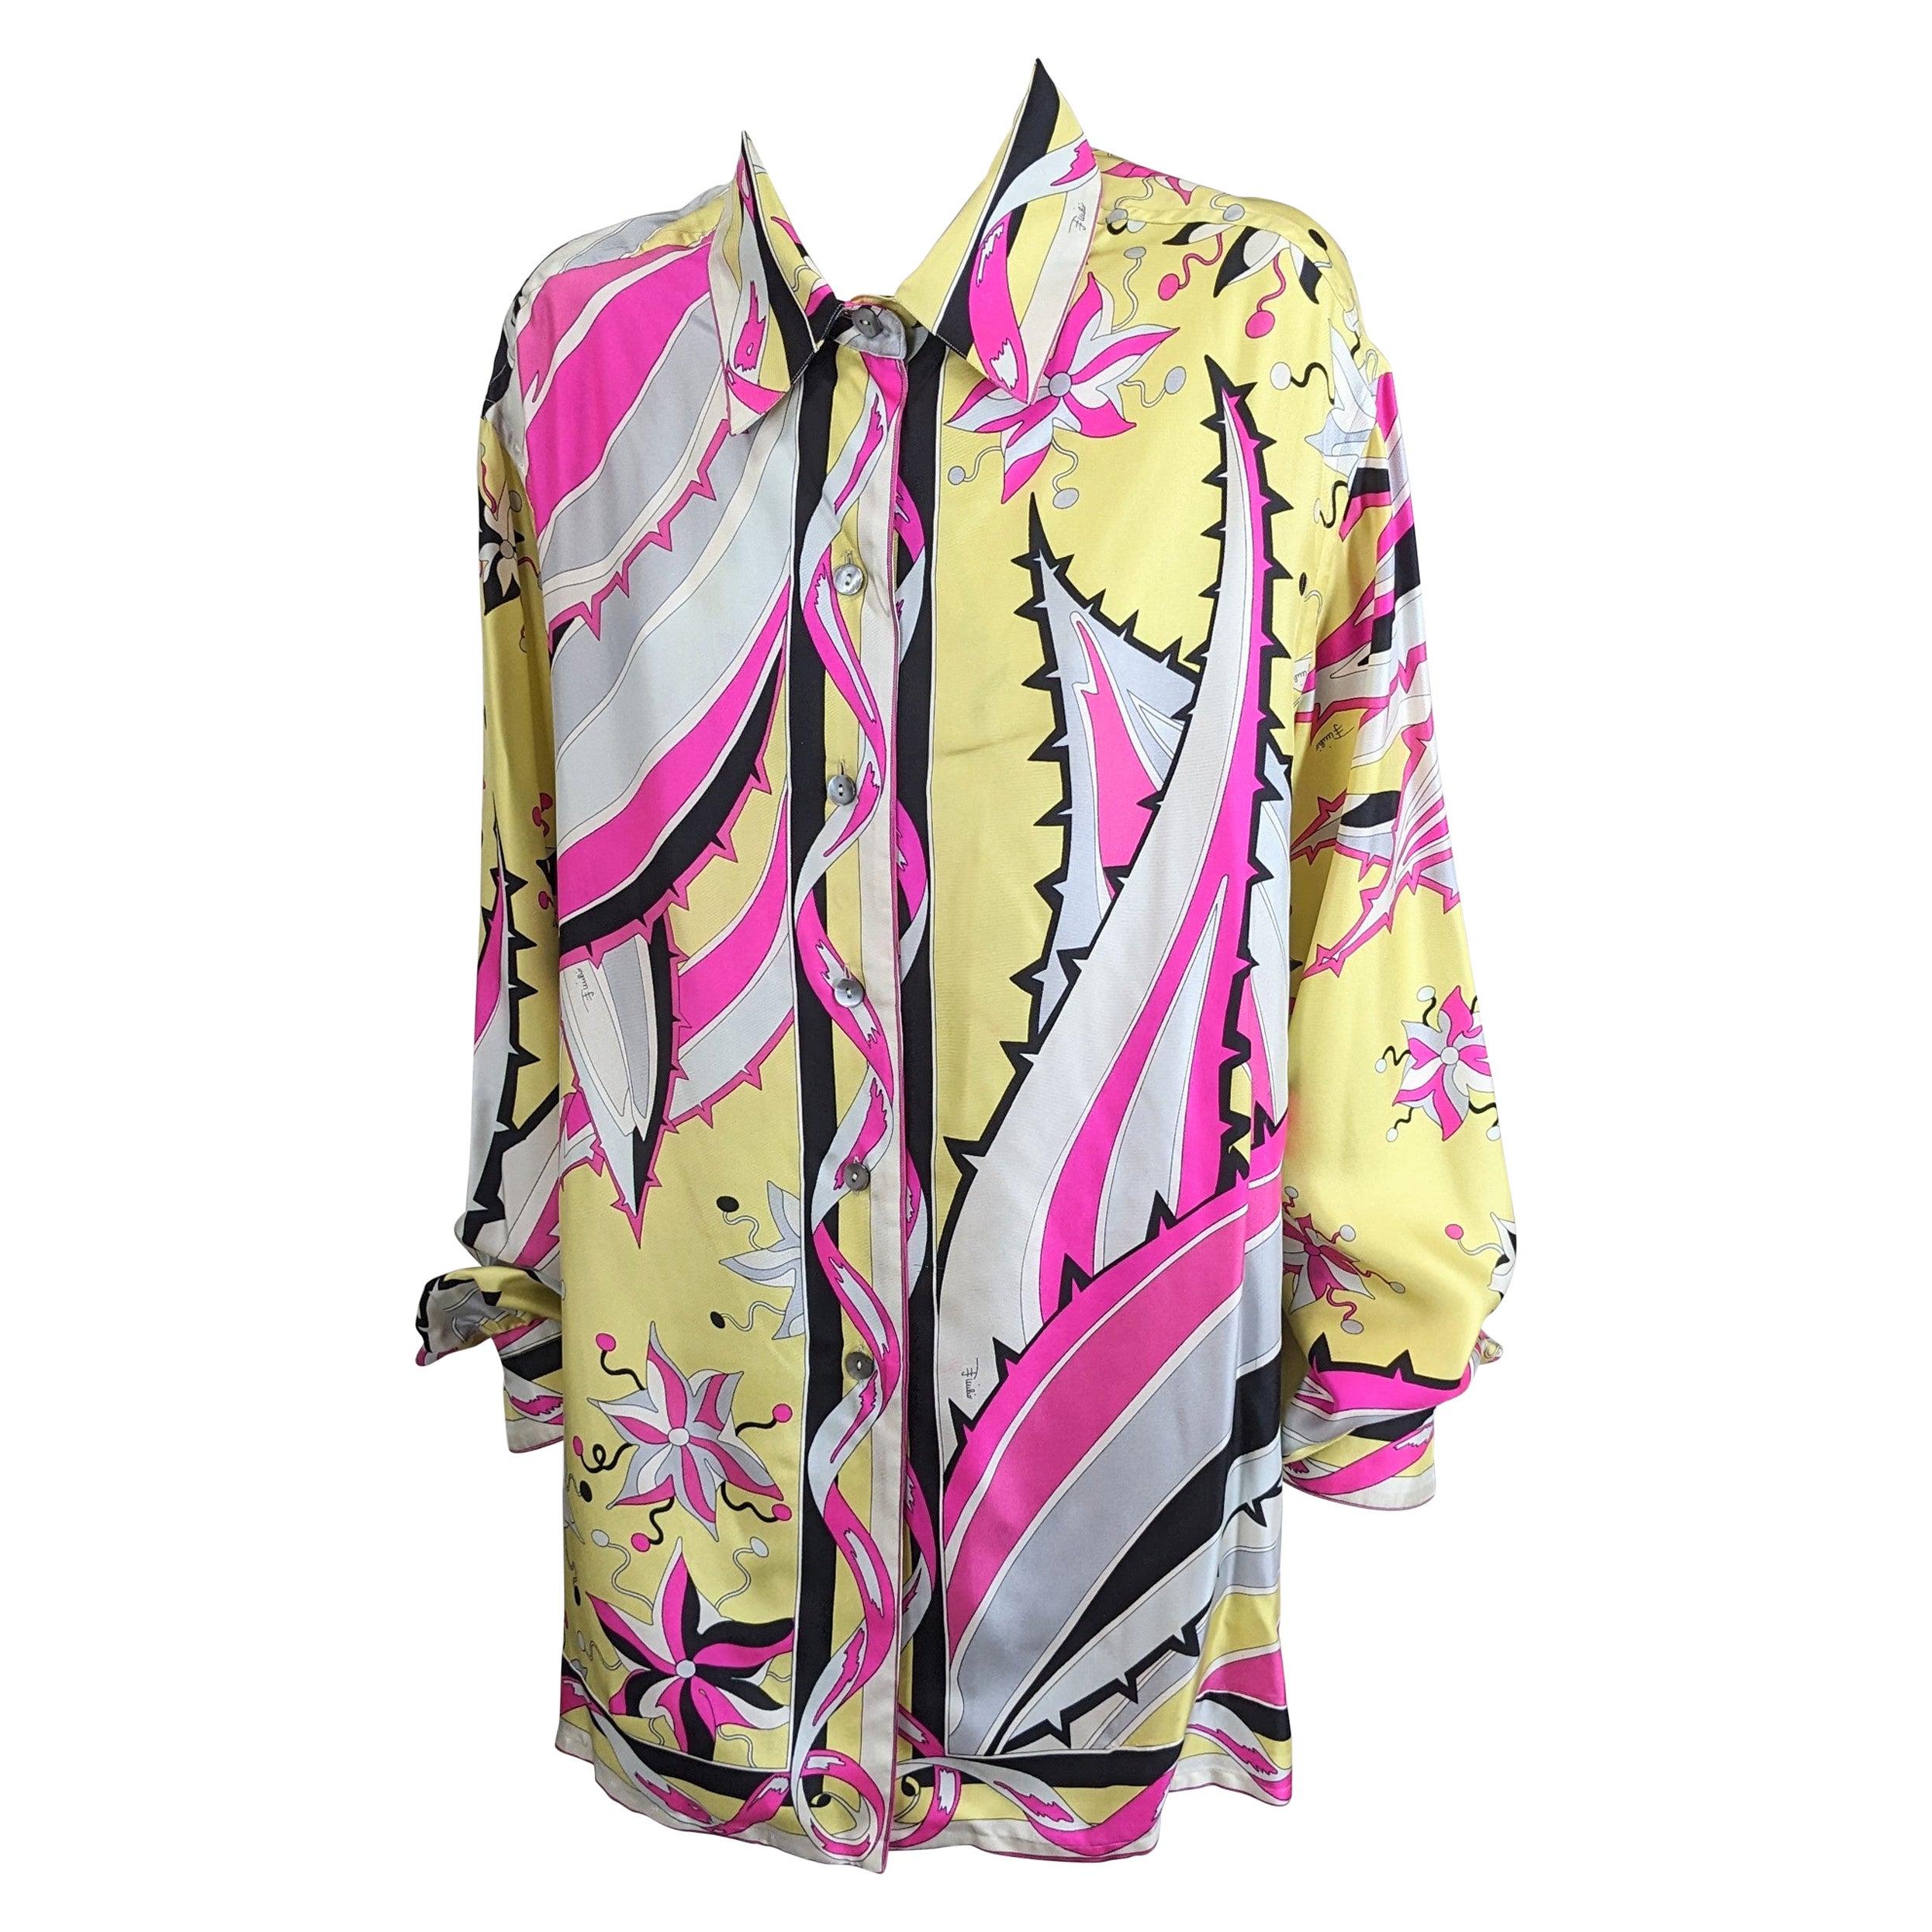 LOUIS FERAUD LUXURY SILK TOP BLOUSE SHIRT MULTICOLORED OVERSIZED AUTH NEW  FR 40